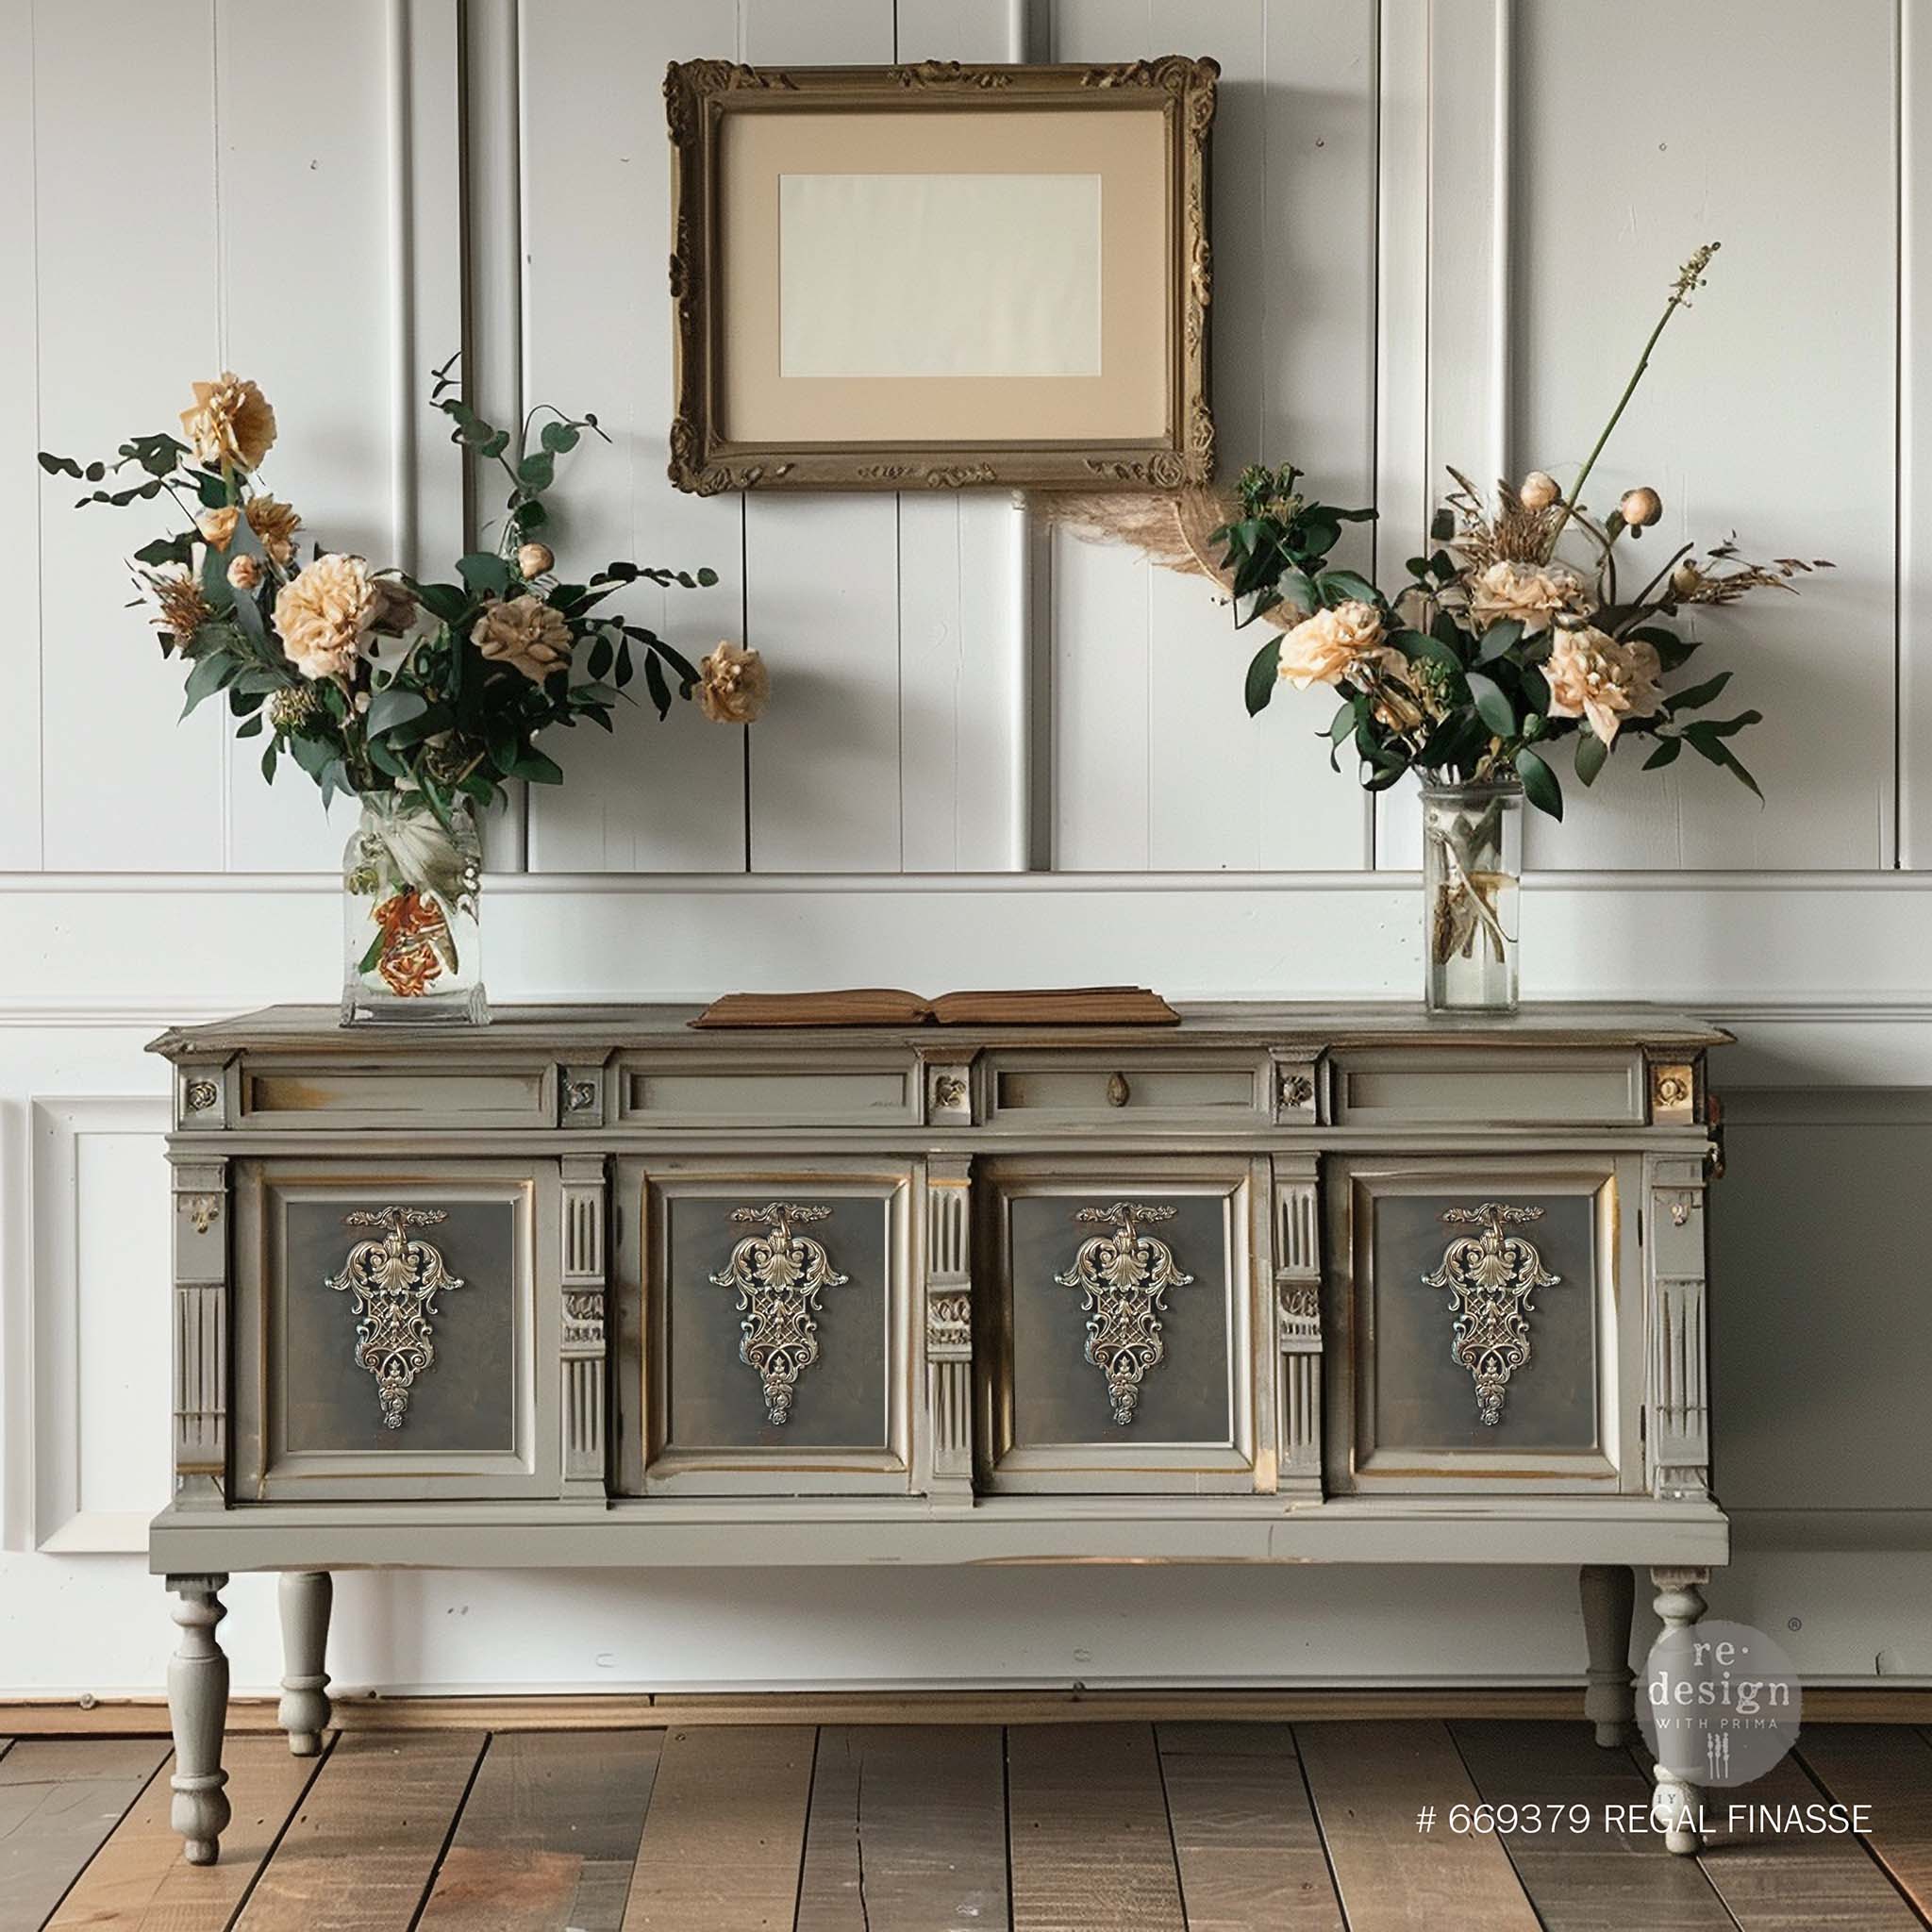 A vintage console table with 4 doors is painted different shades of gray and features ReDesign with Prima's Regal Finasse Decor Poly Casting in the center of each door.